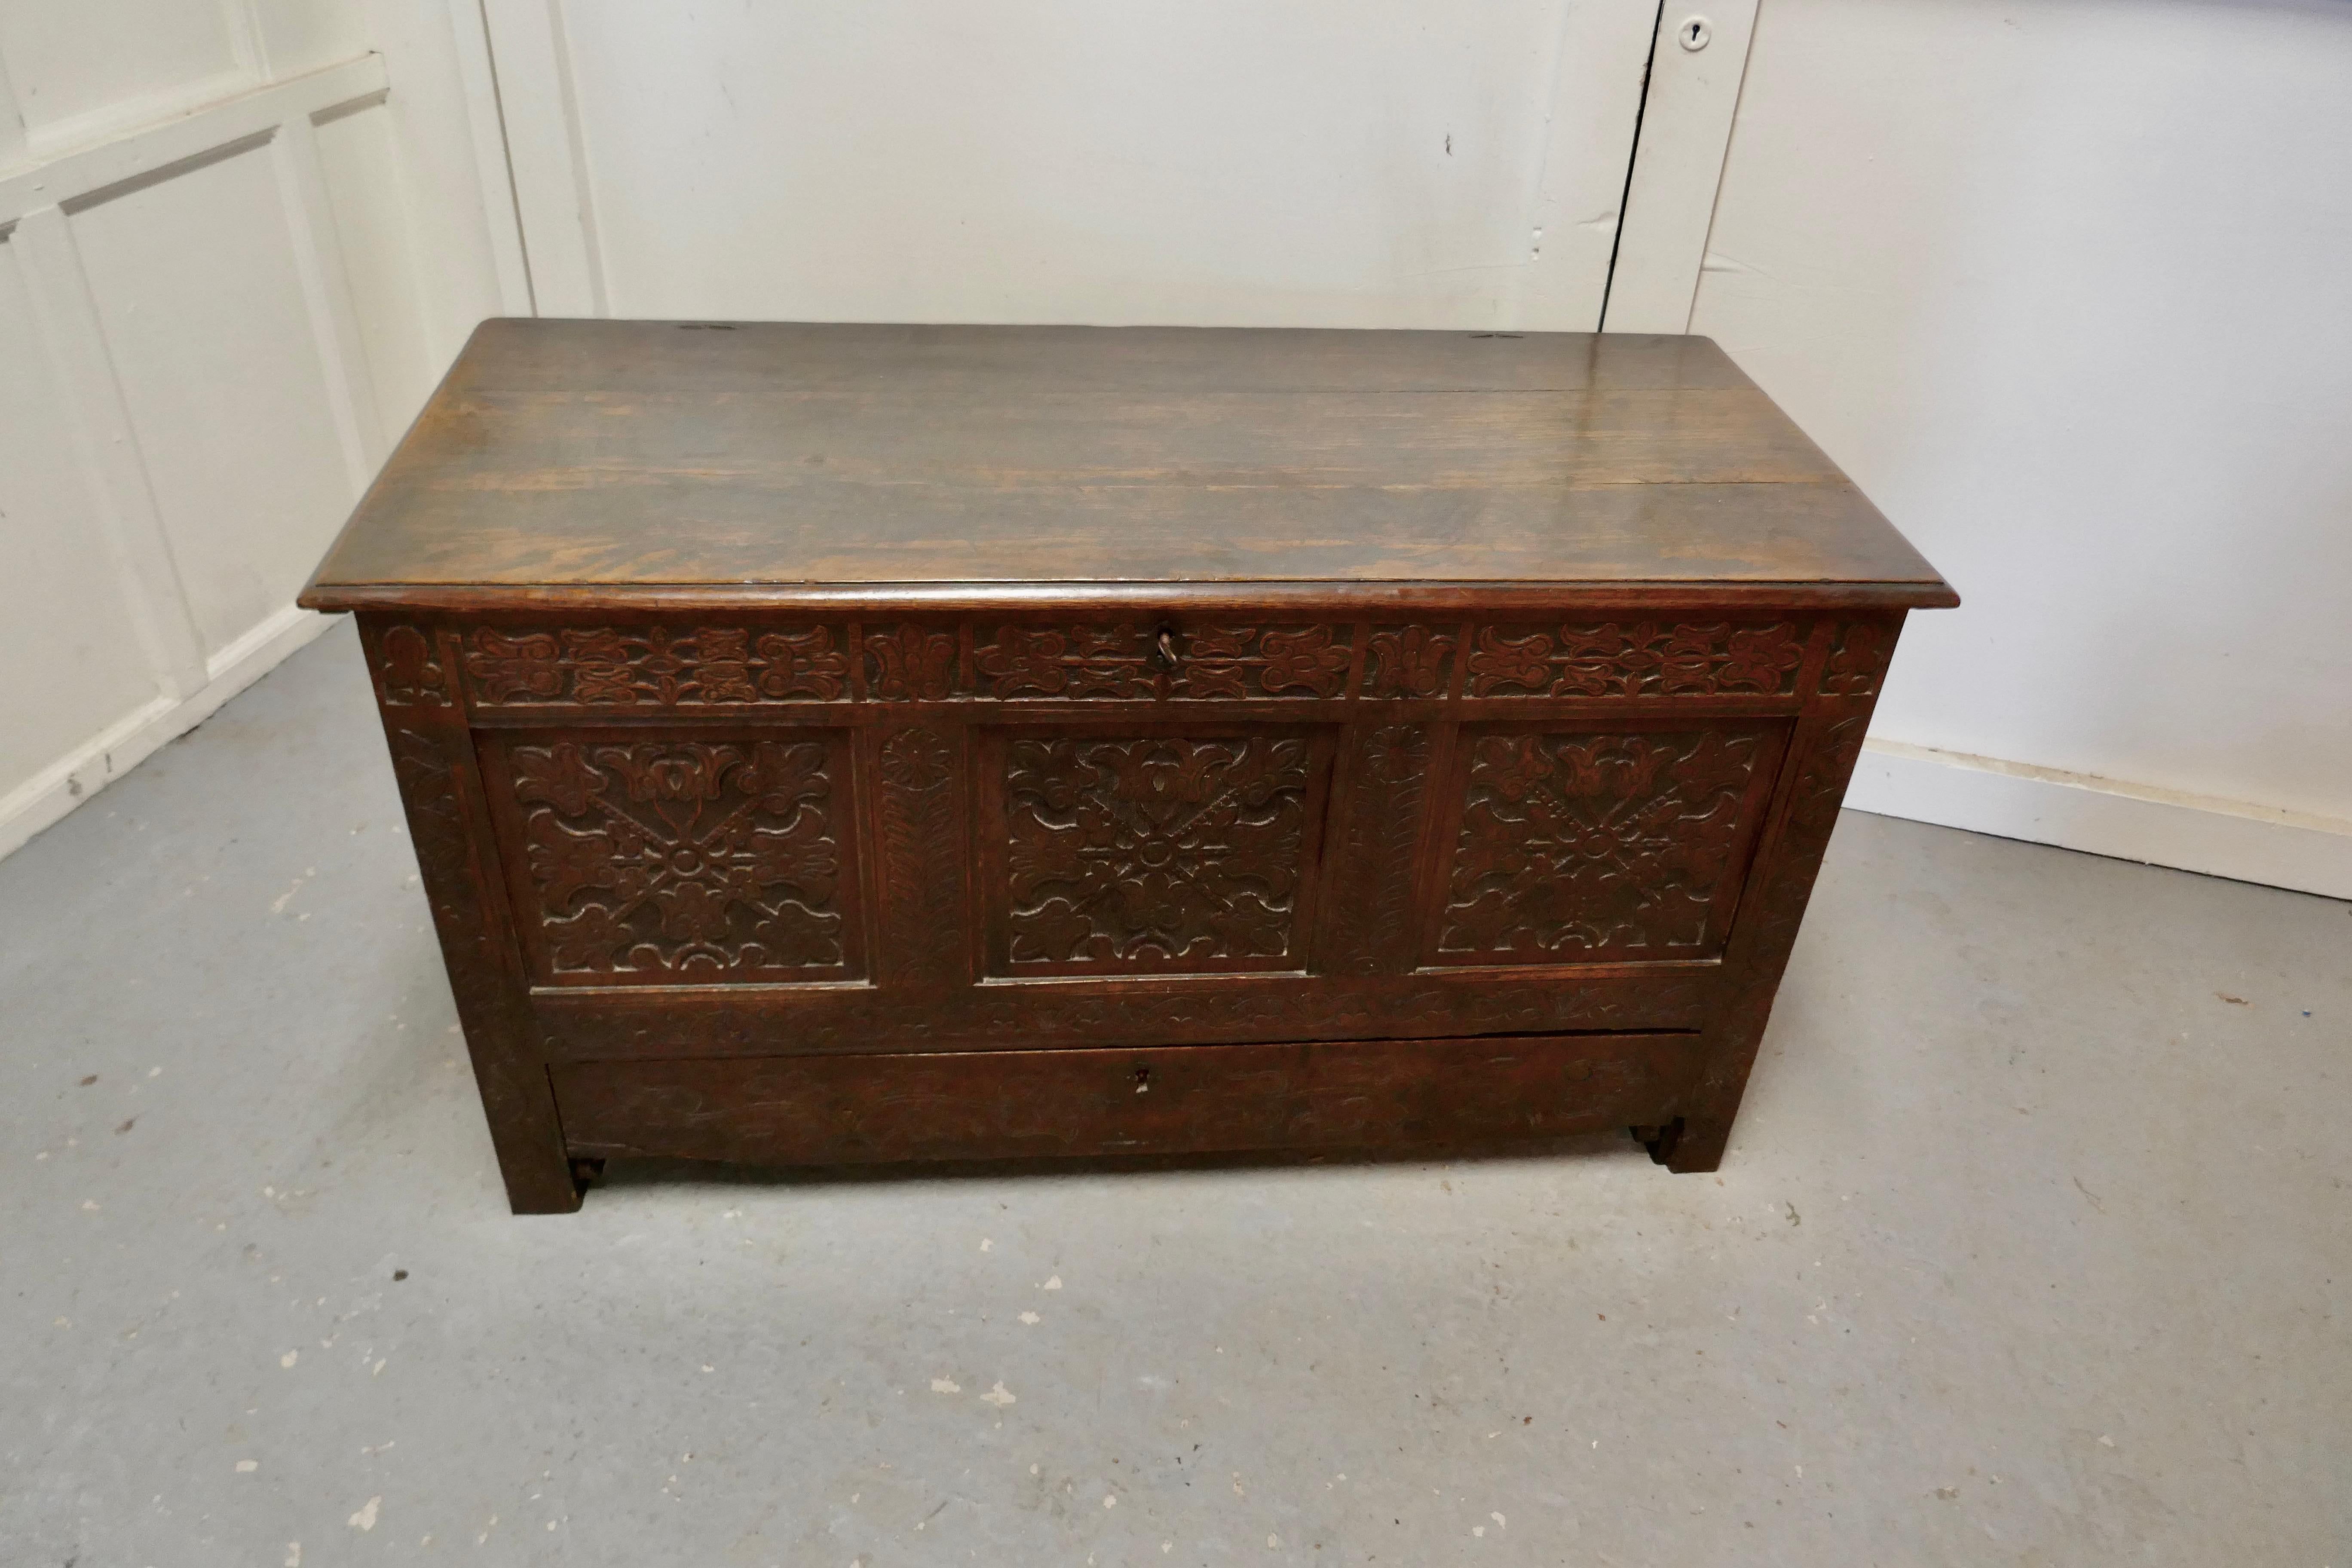 Large carved oak mule chest, marriage chest

This is an attractively carved Marriage chest, the coffer has detailed “Tree of Life” pattern carved panels. The chest has a working lock and key for the top section it also has has a long drawer at the